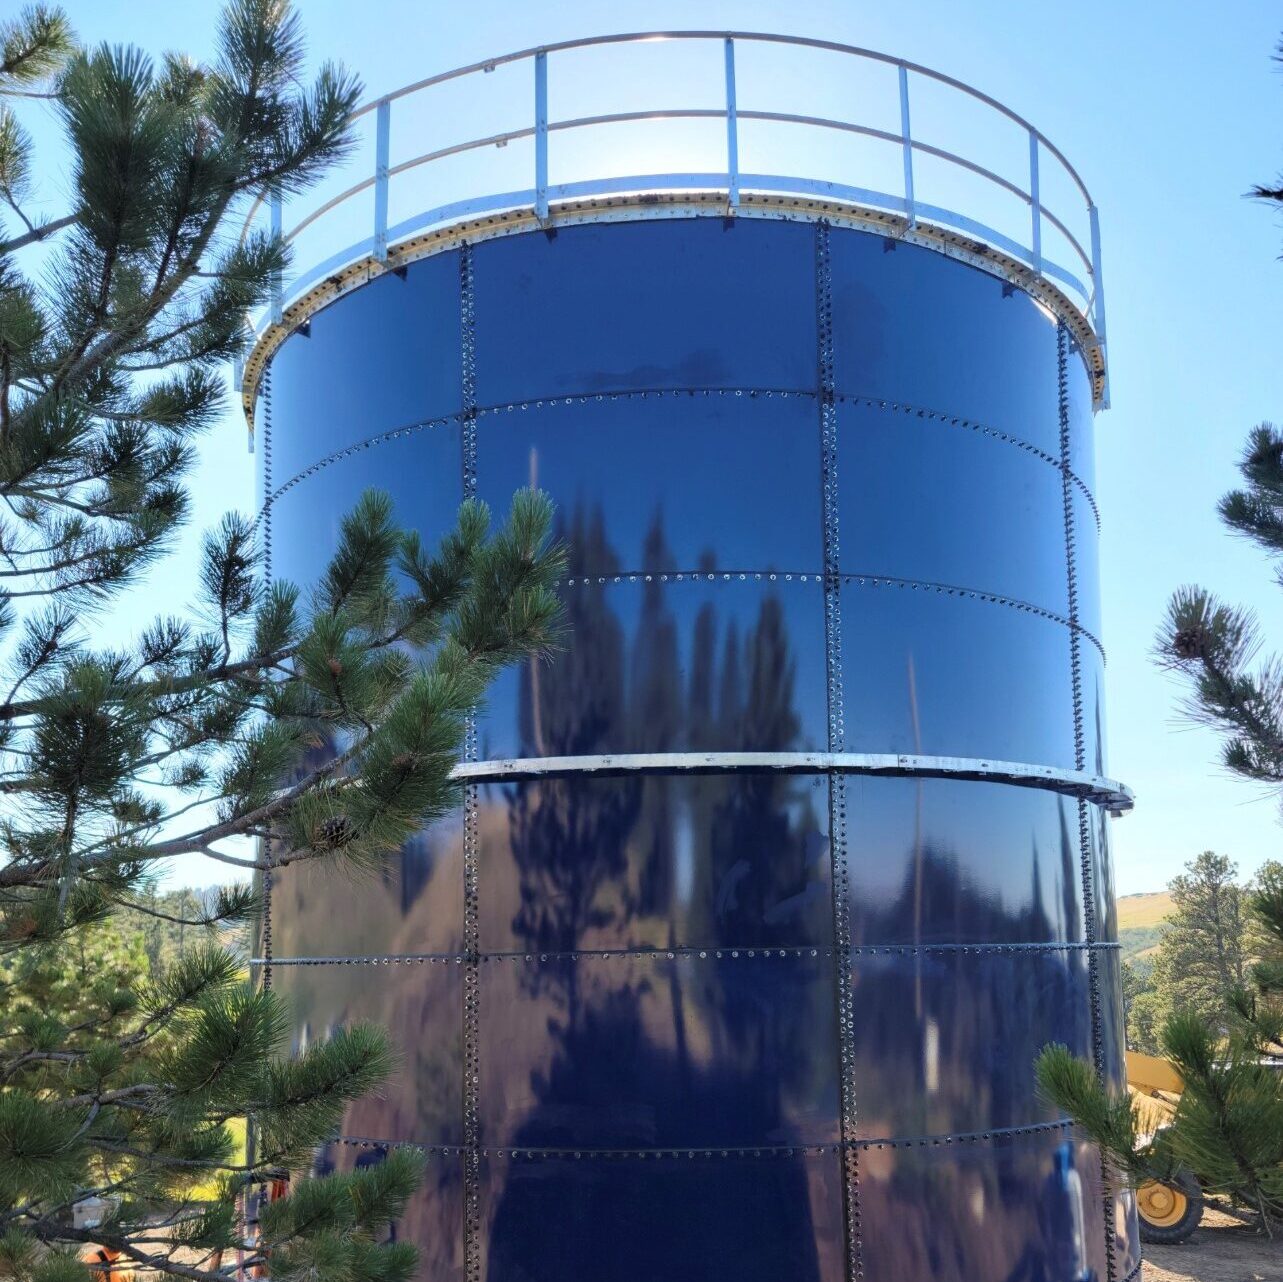 Blue water storage tank with safety rail. Pine trees in front